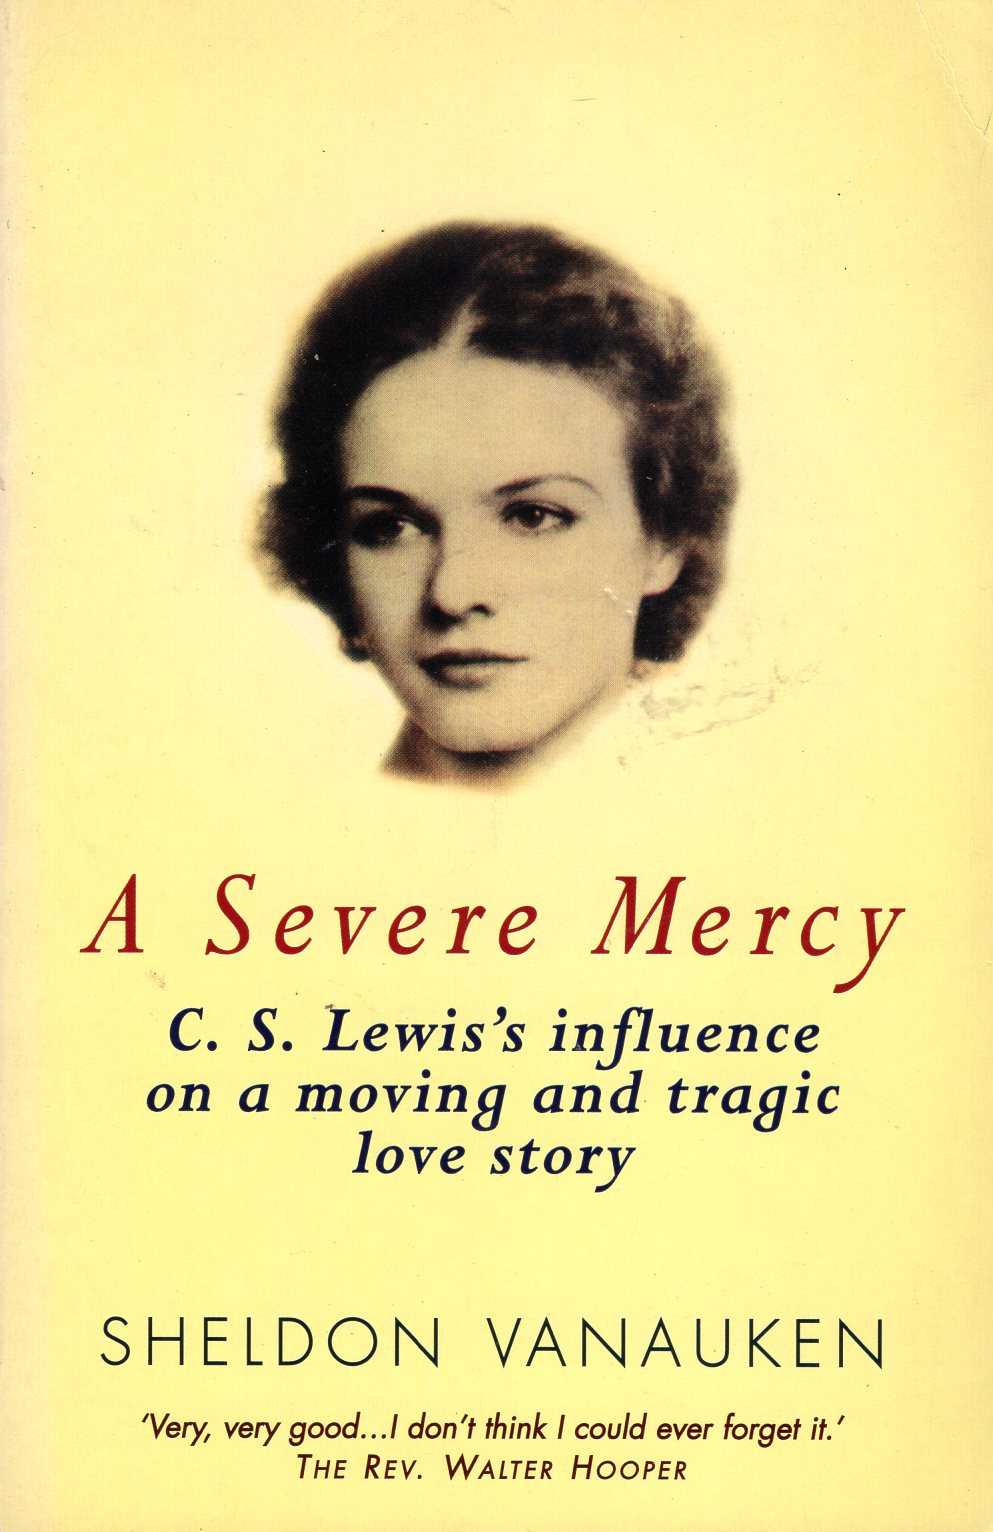 a-severe-mercy-c-s-lewis-s-influence-on-a-moving-and-tragic-love-story